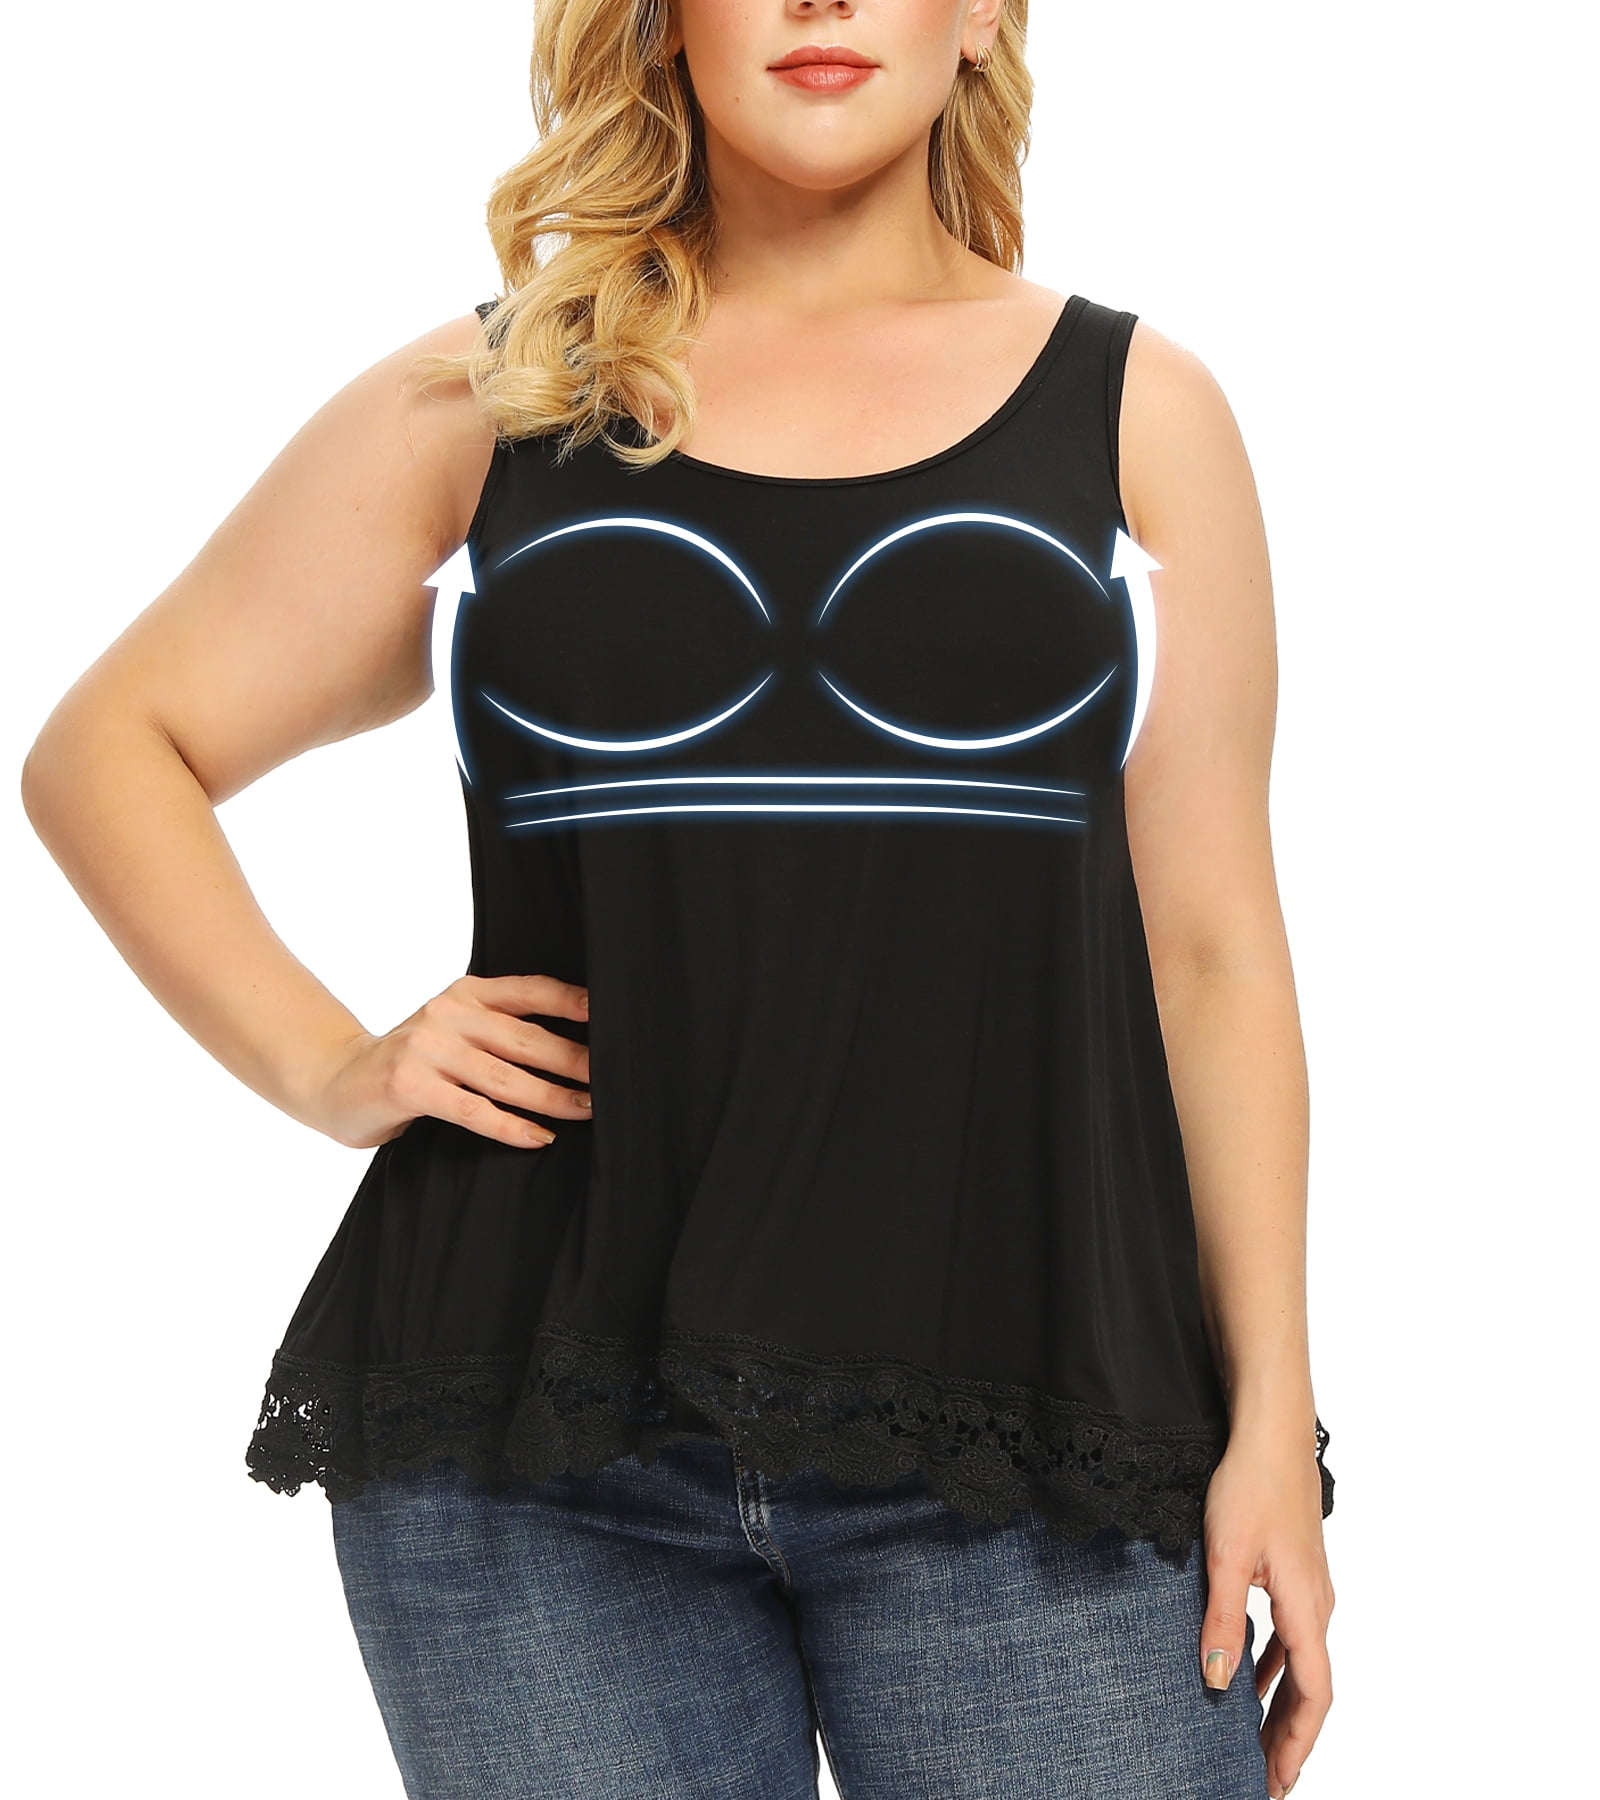 B91xZ Tank Tops With Built In Bras Summer Top For Women Lace Deep